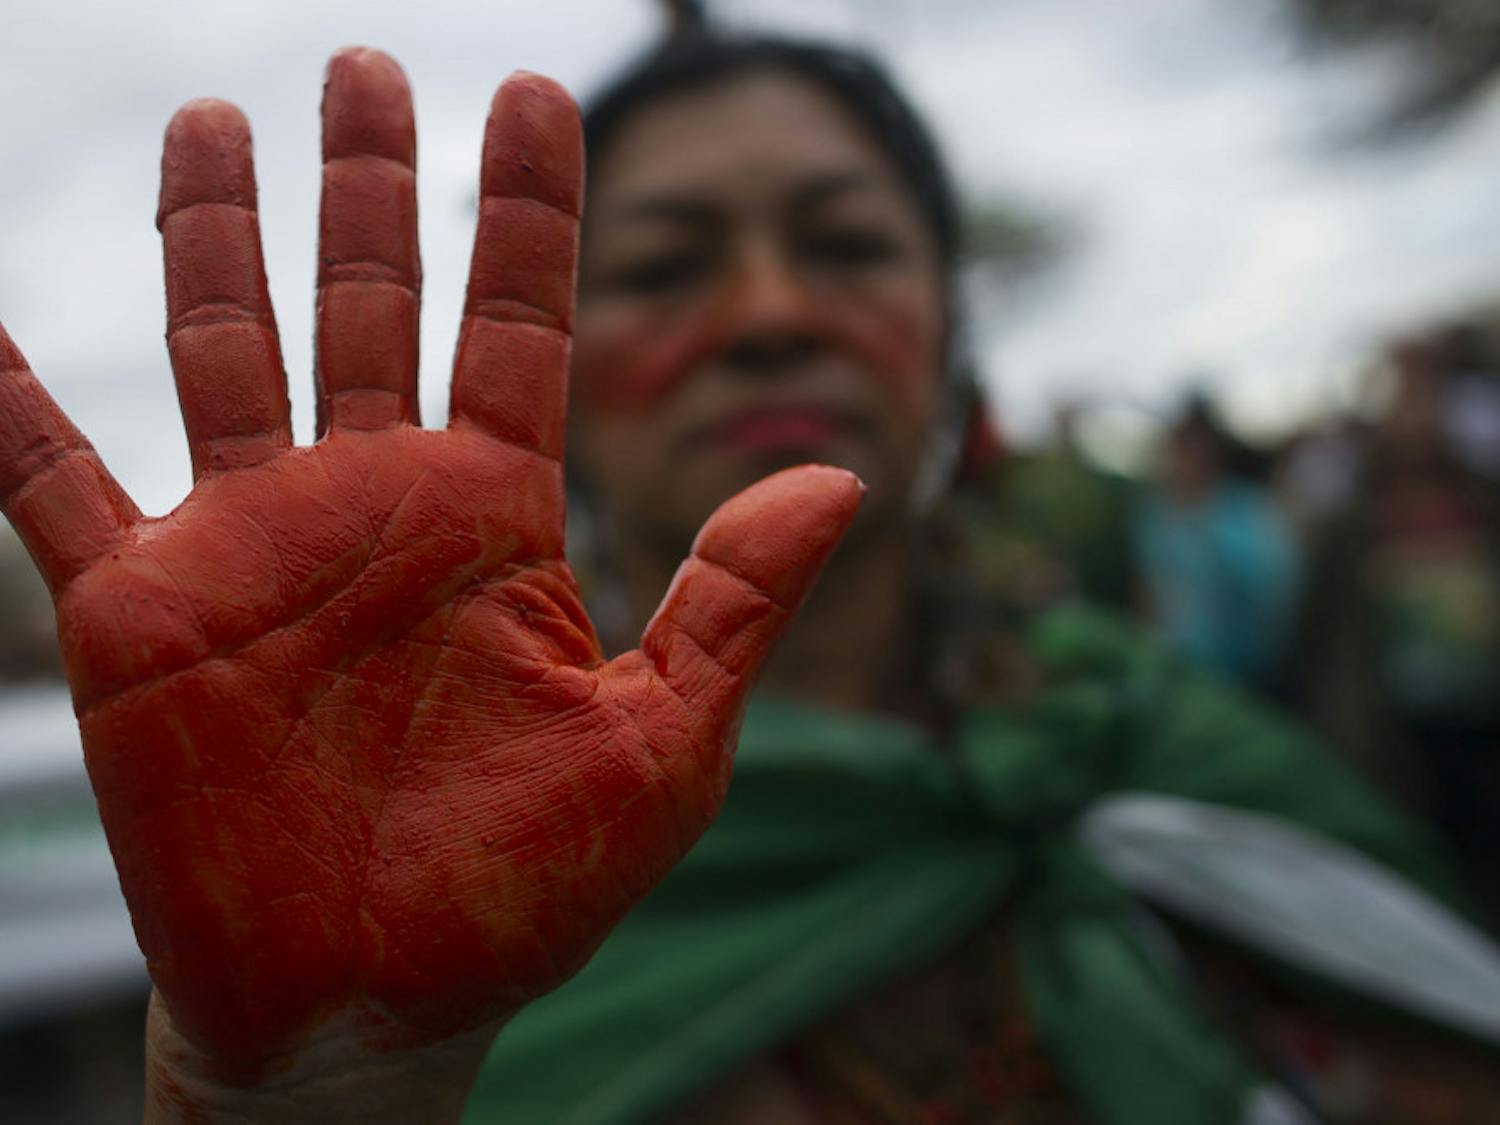 An indigenous woman shows her hands painted in red, representing blood, during a protest in defense of the Amazon while wildfires burn in that region, in Rio de Janeiro, Brazil, Sunday, Aug, 25, 2019. Experts from the country's satellite monitoring agency say most of the fires are set by farmers or ranchers clearing existing farmland, but the same monitoring agency has reported a sharp increase in deforestation this year as well. (AP Photo/Bruna Prado)